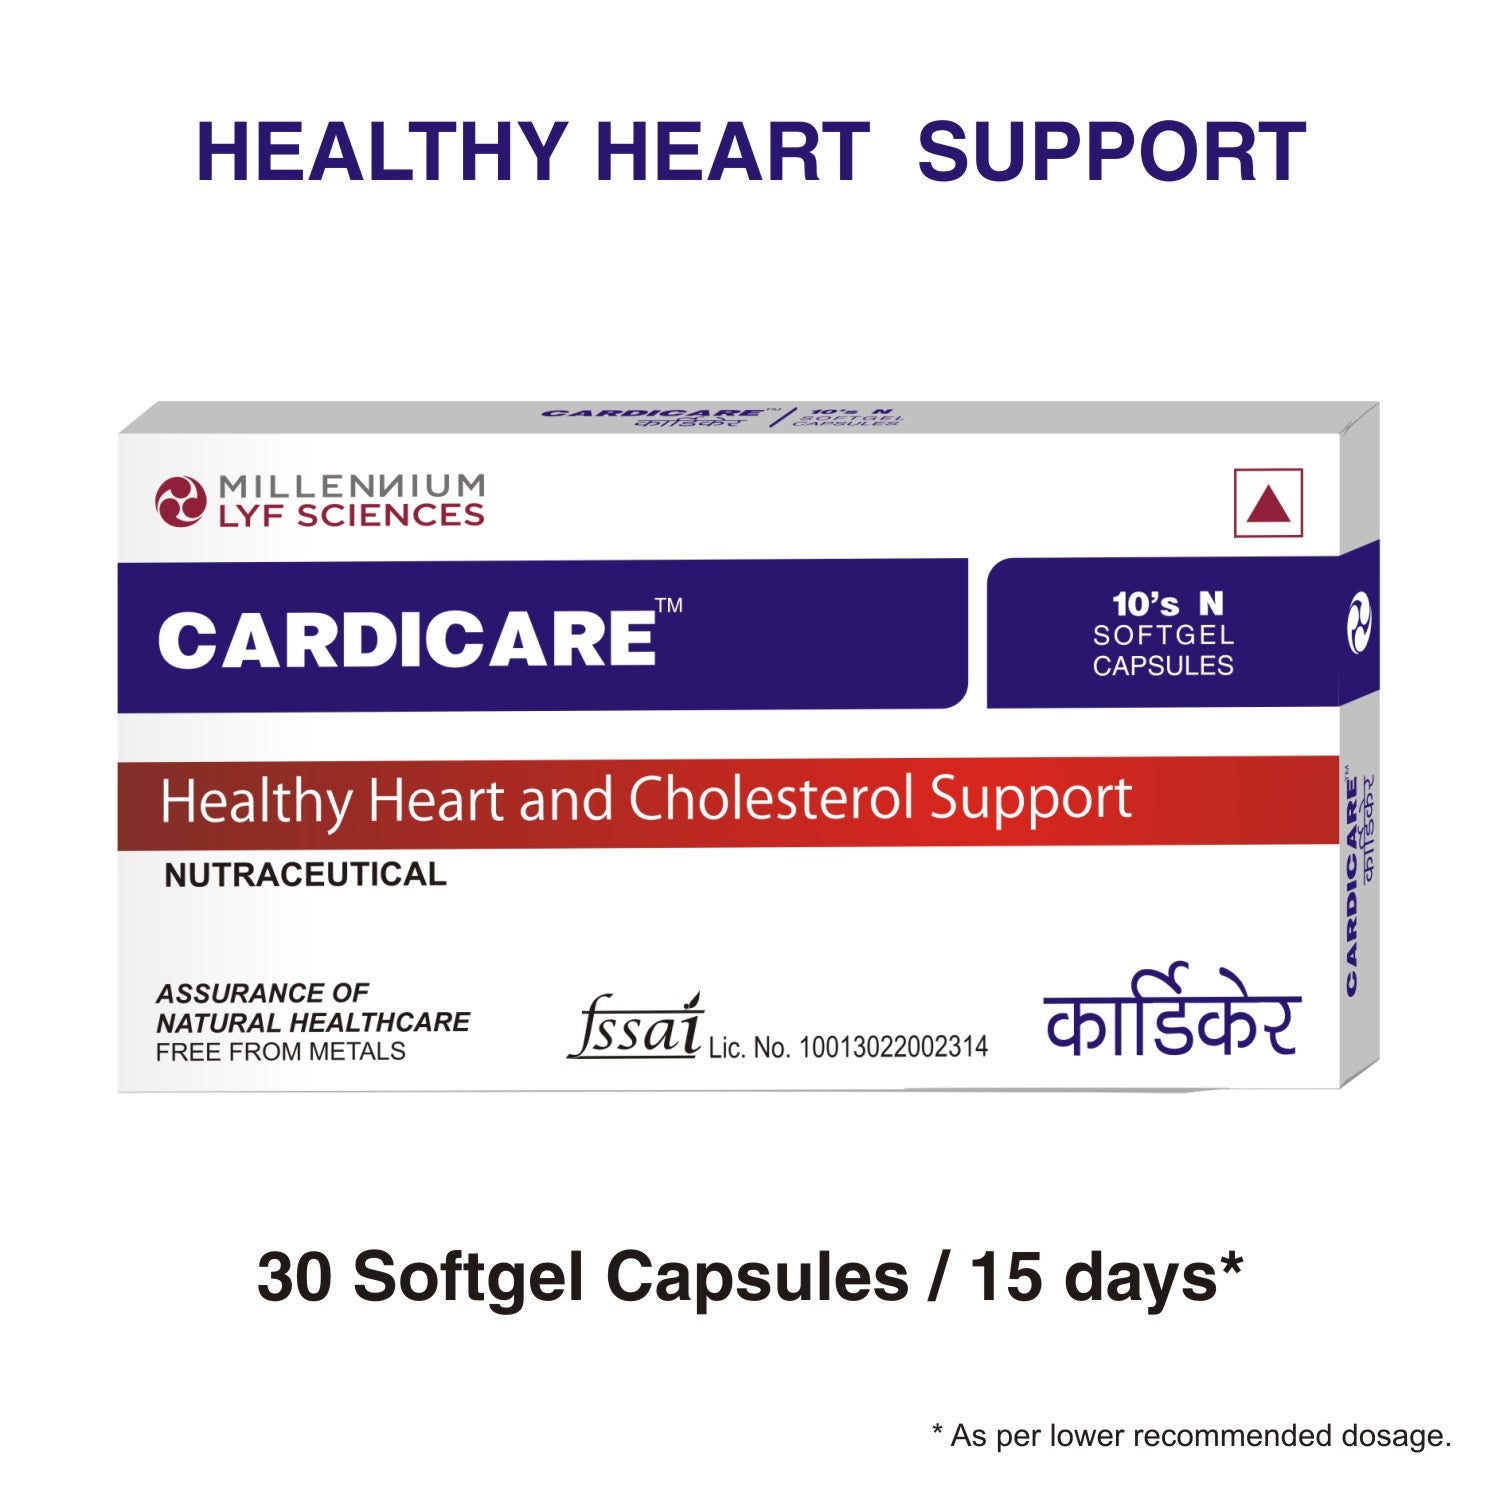 30 Capsules of Cardicare can be consumed within 15 days